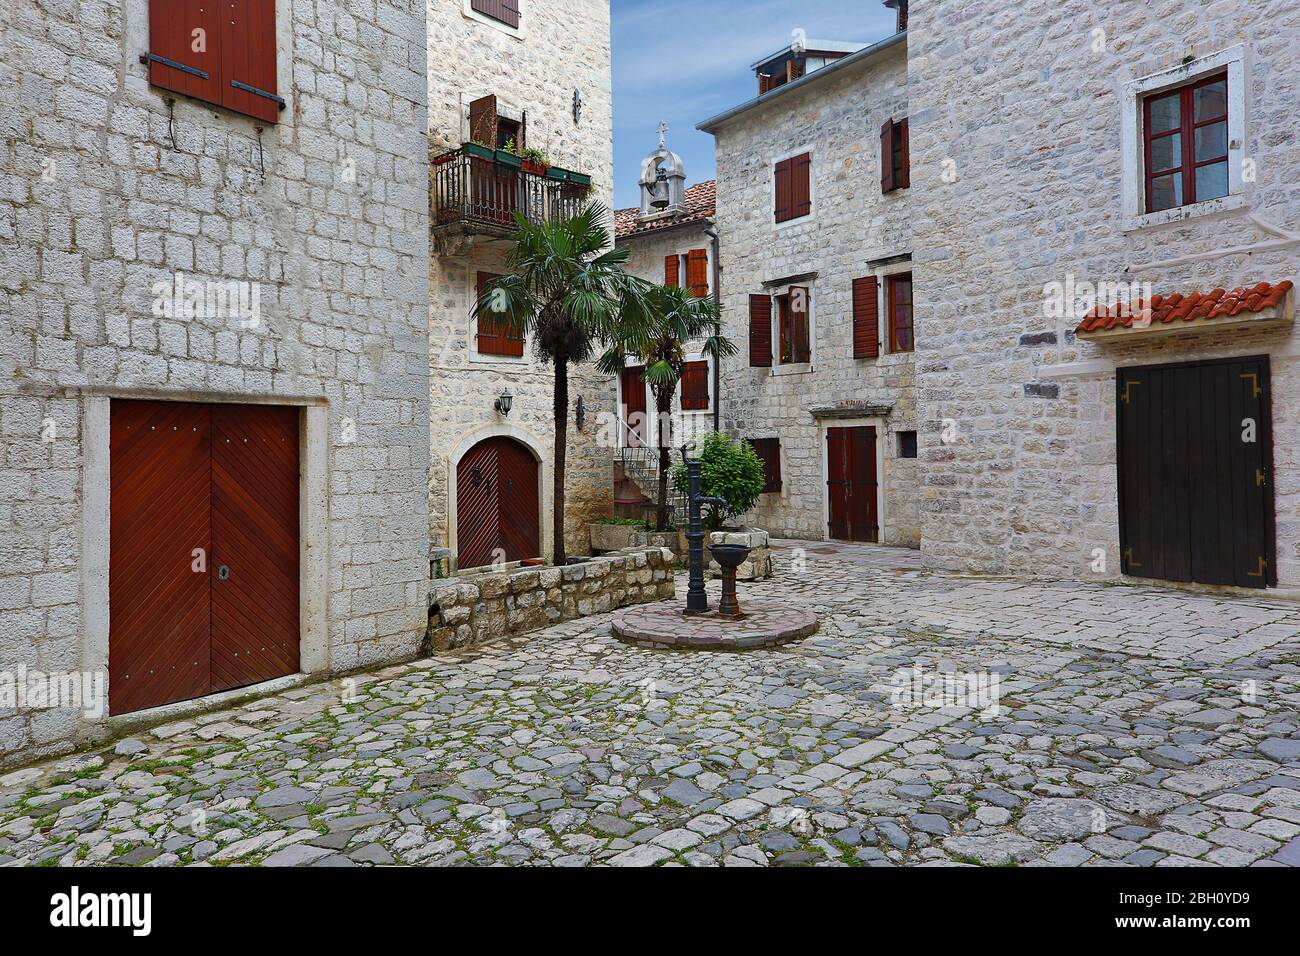 Historical stone houses in the old city of Kotor, Montenegro Stock Photo